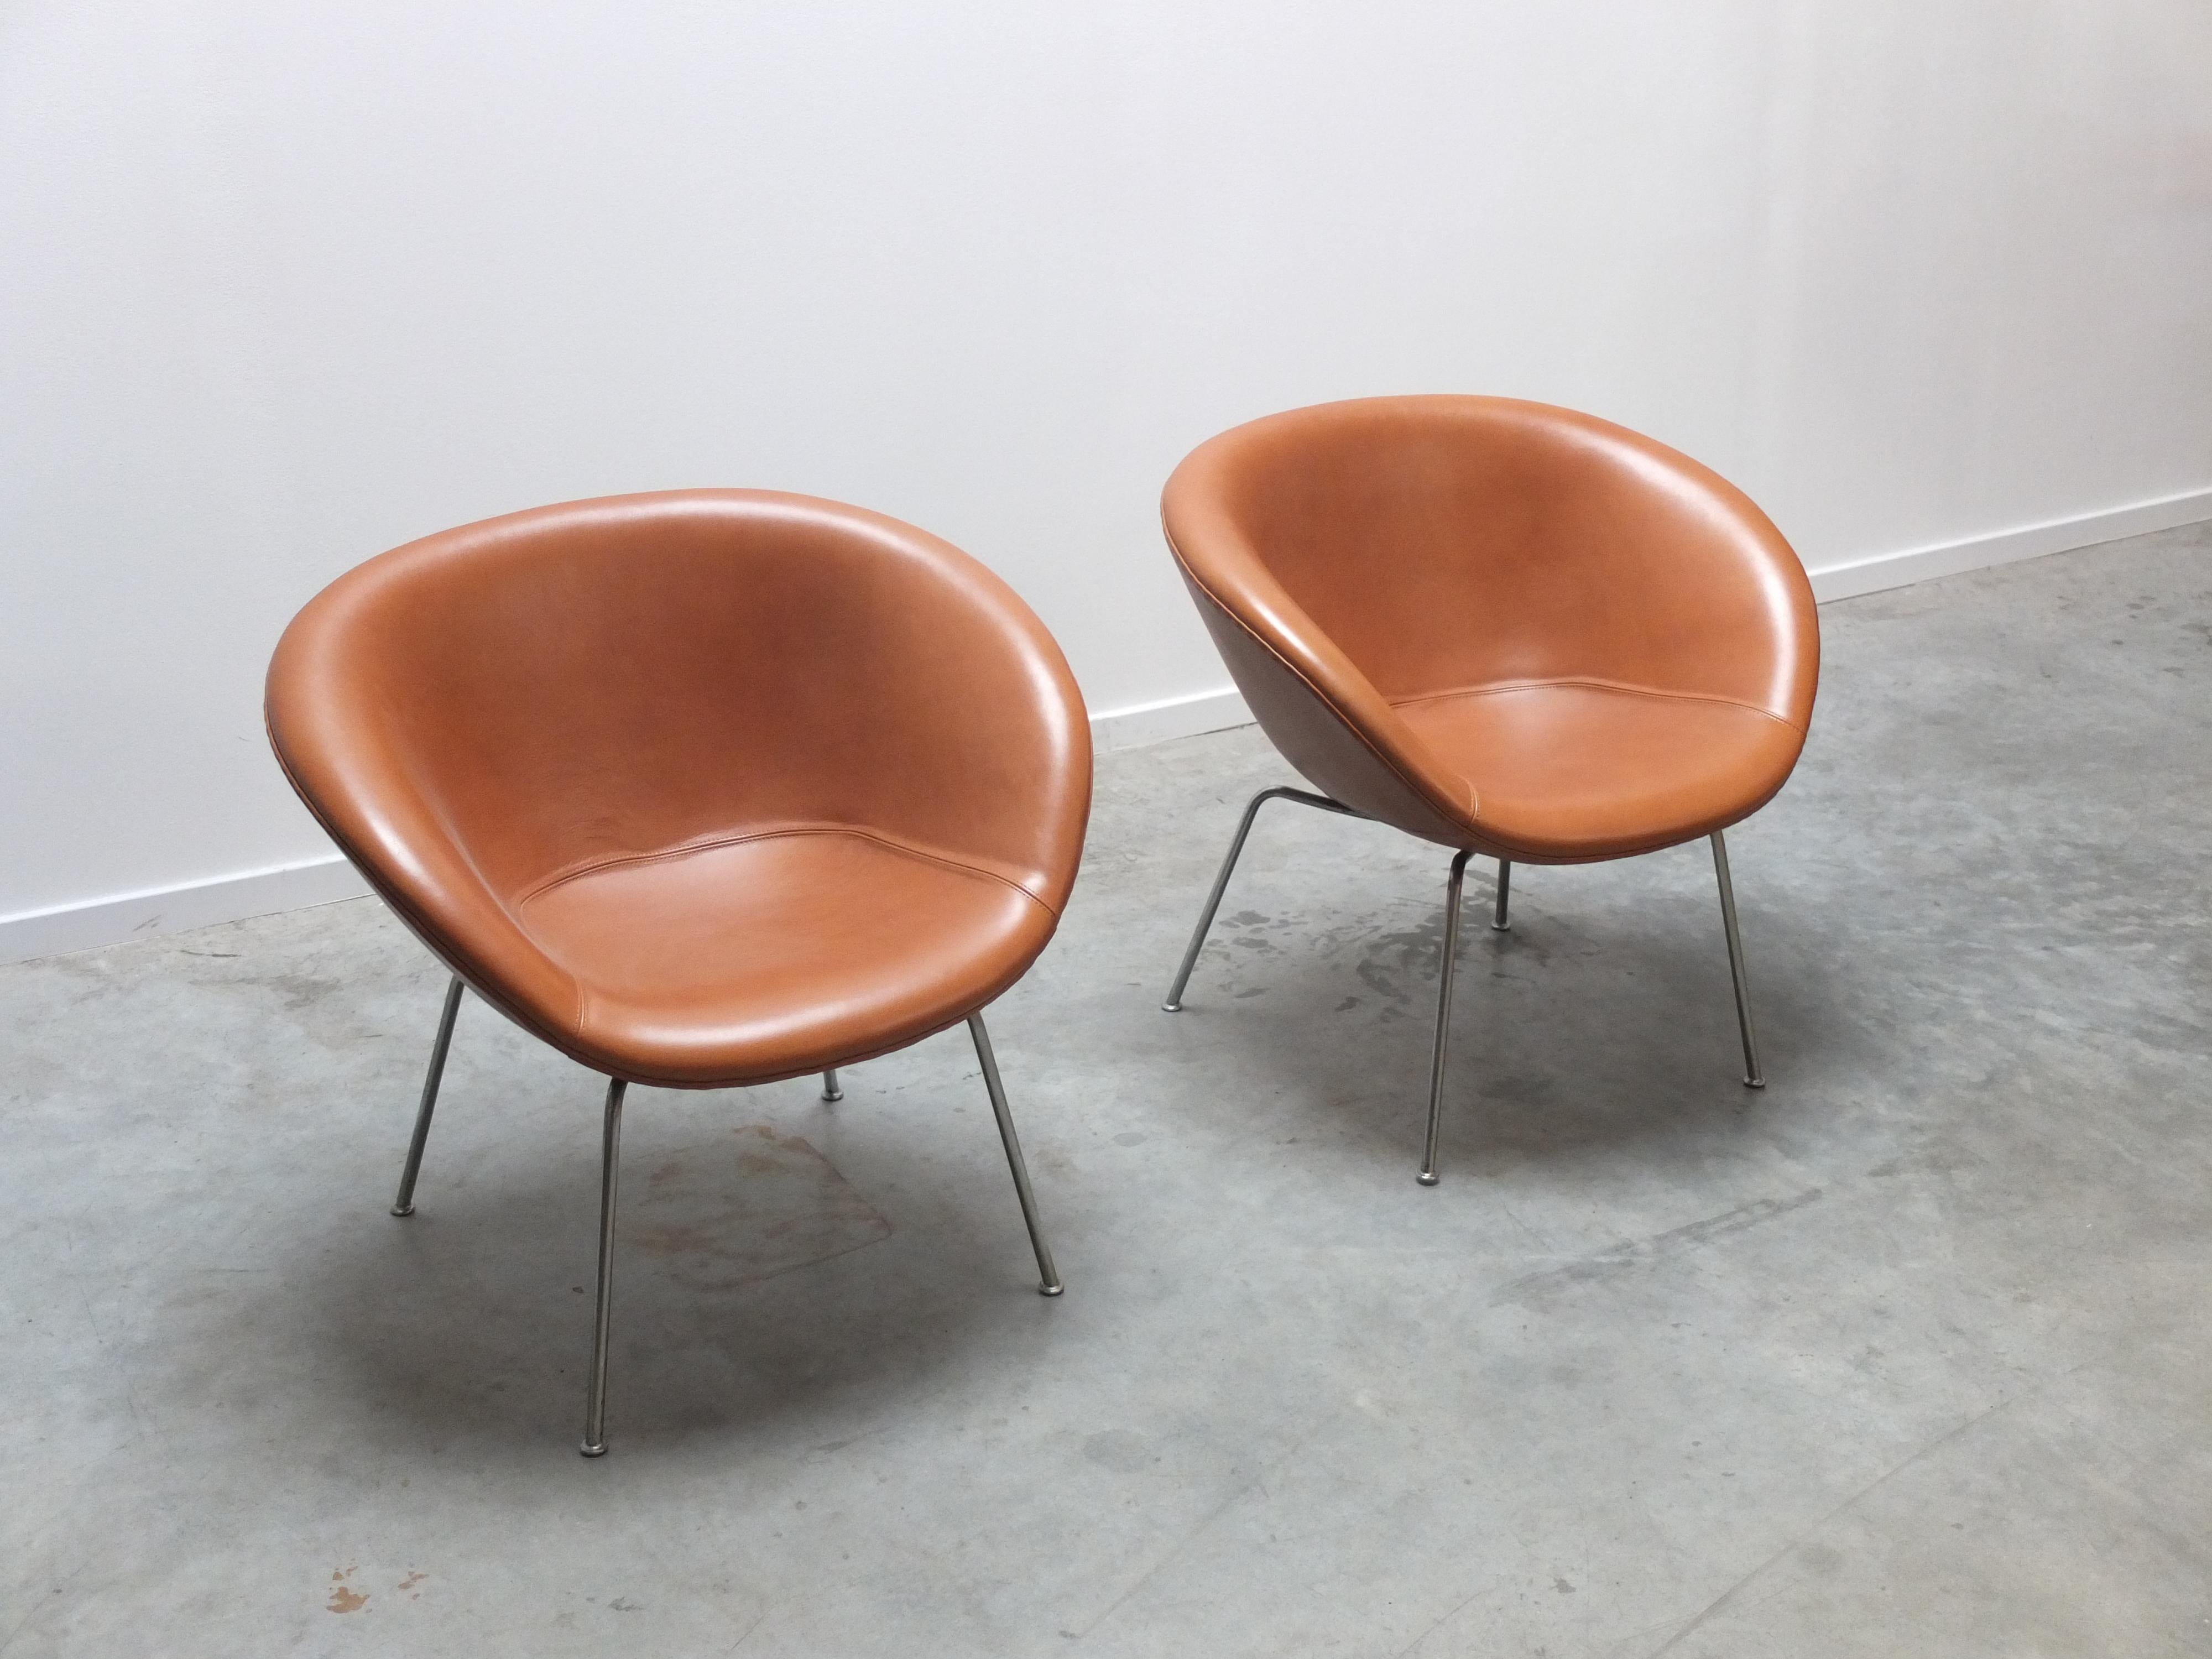 Danish Early Pair of 'Pot' Lounge Chairs by Arne Jacobsen for Fritz Hansen, 1950s For Sale